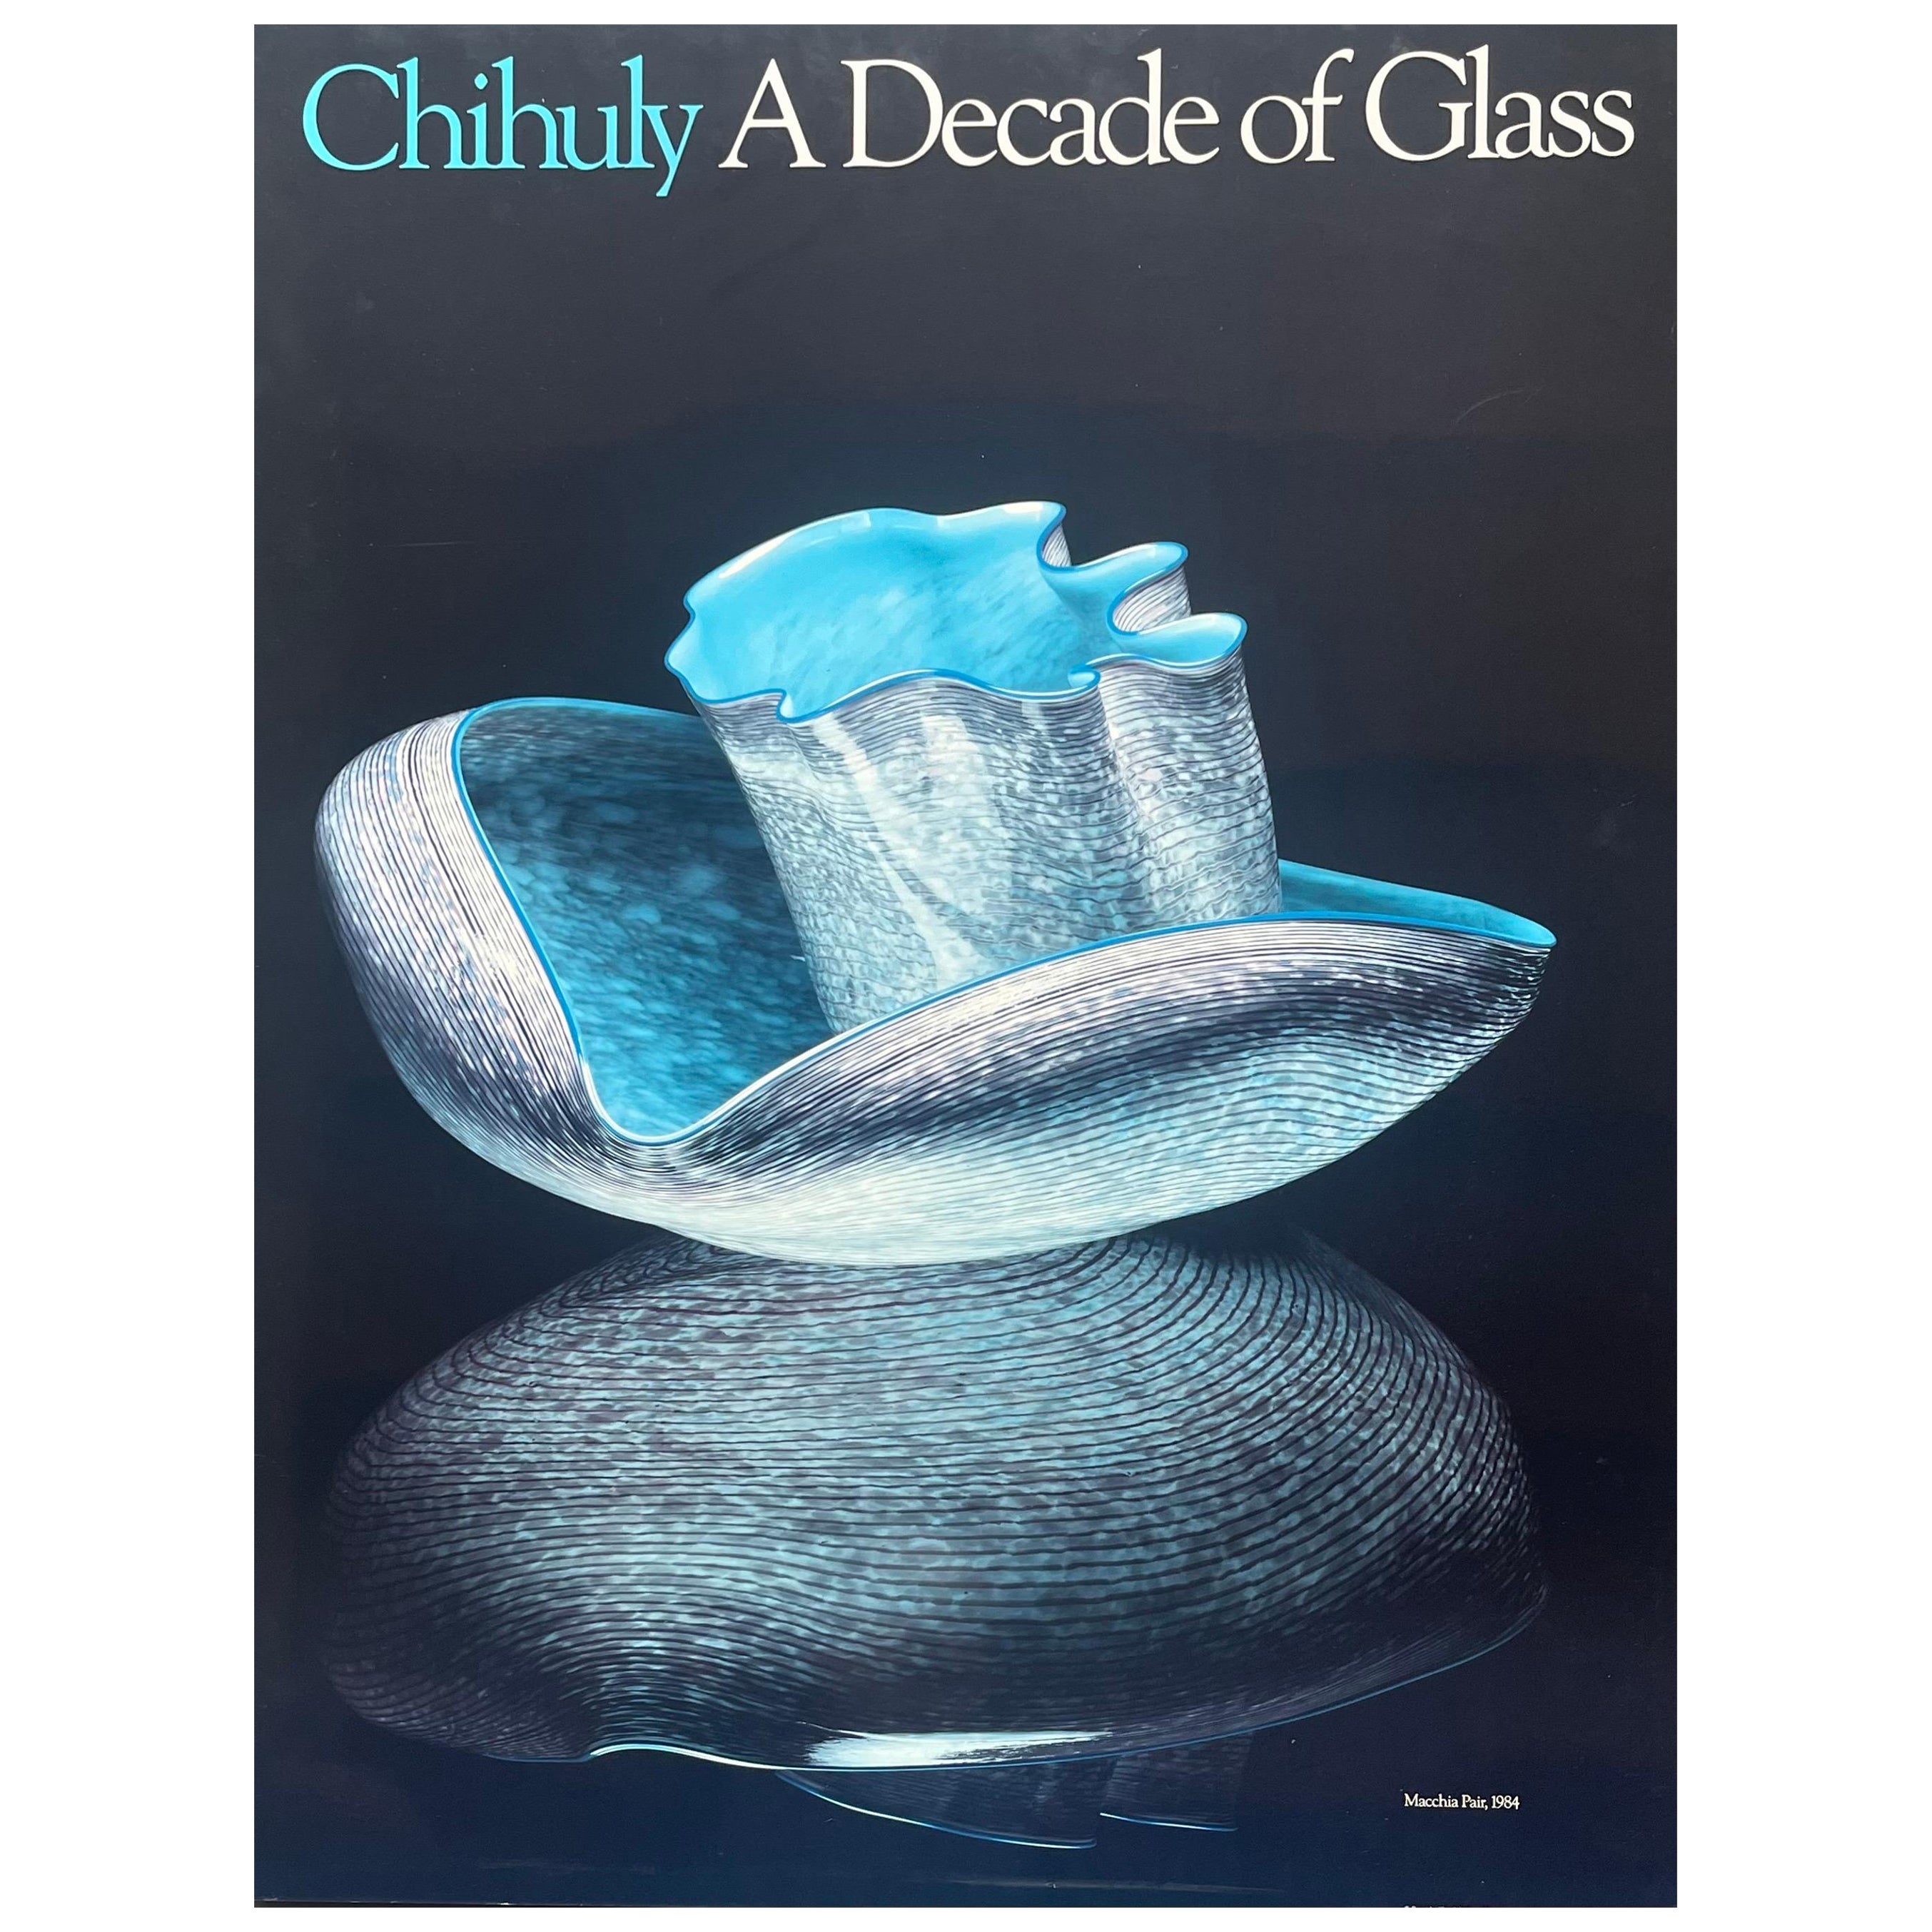 Is all Chihuly glass signed?